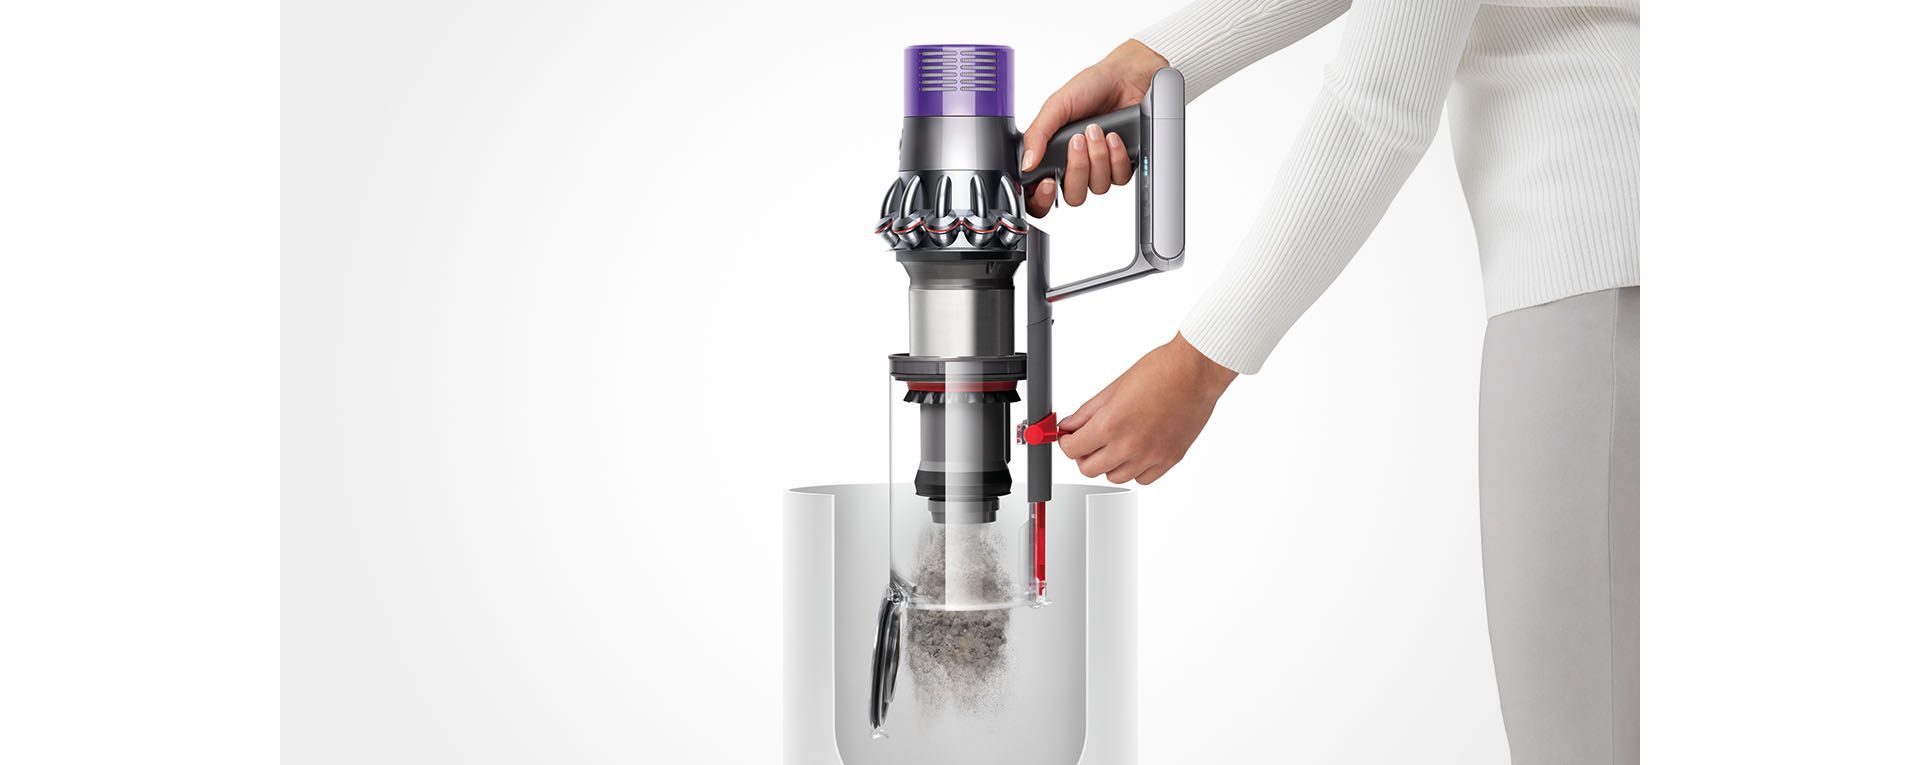 How to set up and use your Dyson Cyclone V10™ cordless vacuum